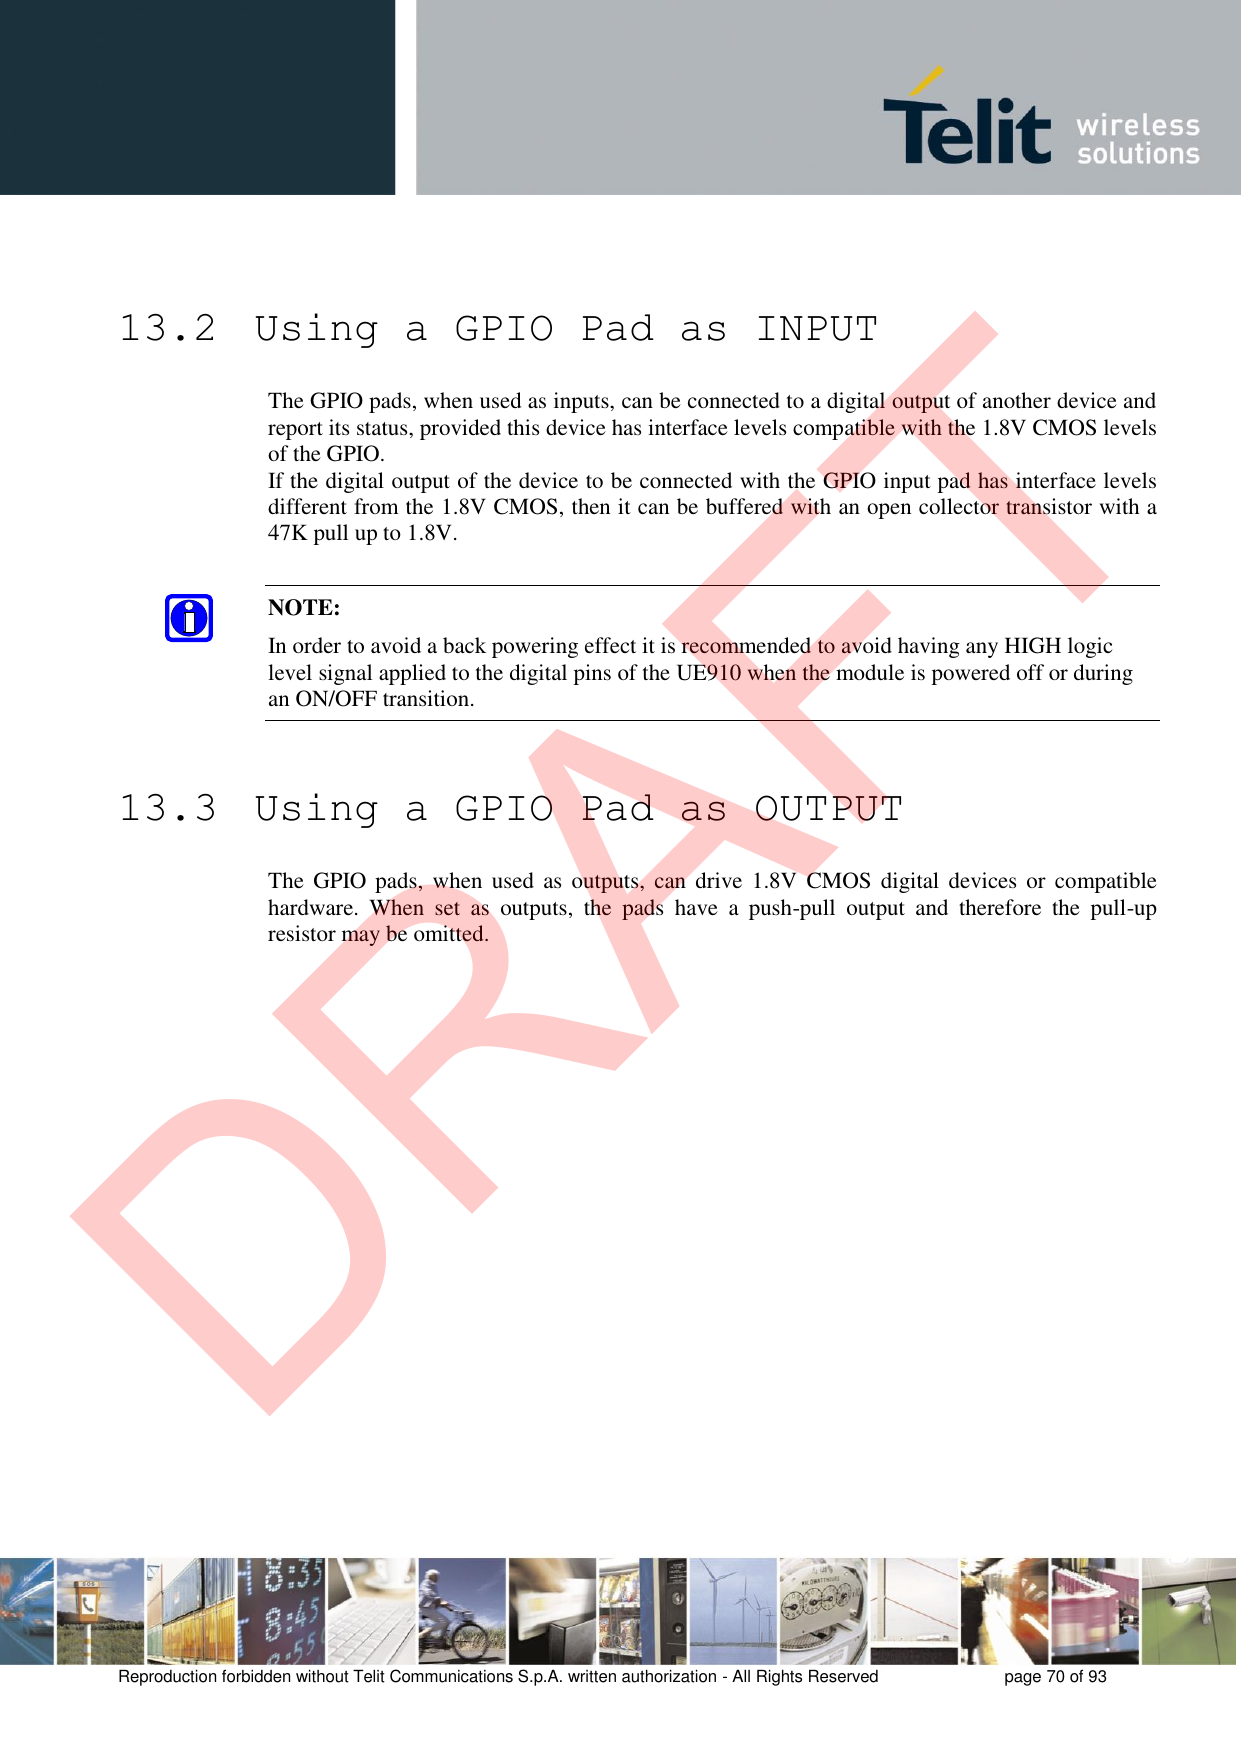 Reproduction forbidden without Telit Communications S.p.A. written authorization - All Rights Reserved  page 70 of 93 13.2  Using a GPIO Pad as INPUT The GPIO pads, when used as inputs, can be connected to a digital output of another device and report its status, provided this device has interface levels compatible with the 1.8V CMOS levels of the GPIO.  If the digital output of the device to be connected with the GPIO input pad has interface levels different from the 1.8V CMOS, then it can be buffered with an open collector transistor with a 47K pull up to 1.8V. NOTE: In order to avoid a back powering effect it is recommended to avoid having any HIGH logic level signal applied to the digital pins of the UE910 when the module is powered off or during an ON/OFF transition. 13.3  Using a GPIO Pad as OUTPUT The  GPIO pads,  when  used as outputs,  can drive 1.8V  CMOS  digital devices or  compatible hardware.  When  set  as  outputs,  the  pads  have  a  push-pull  output  and  therefore  the  pull-up resistor may be omitted. DRAFT